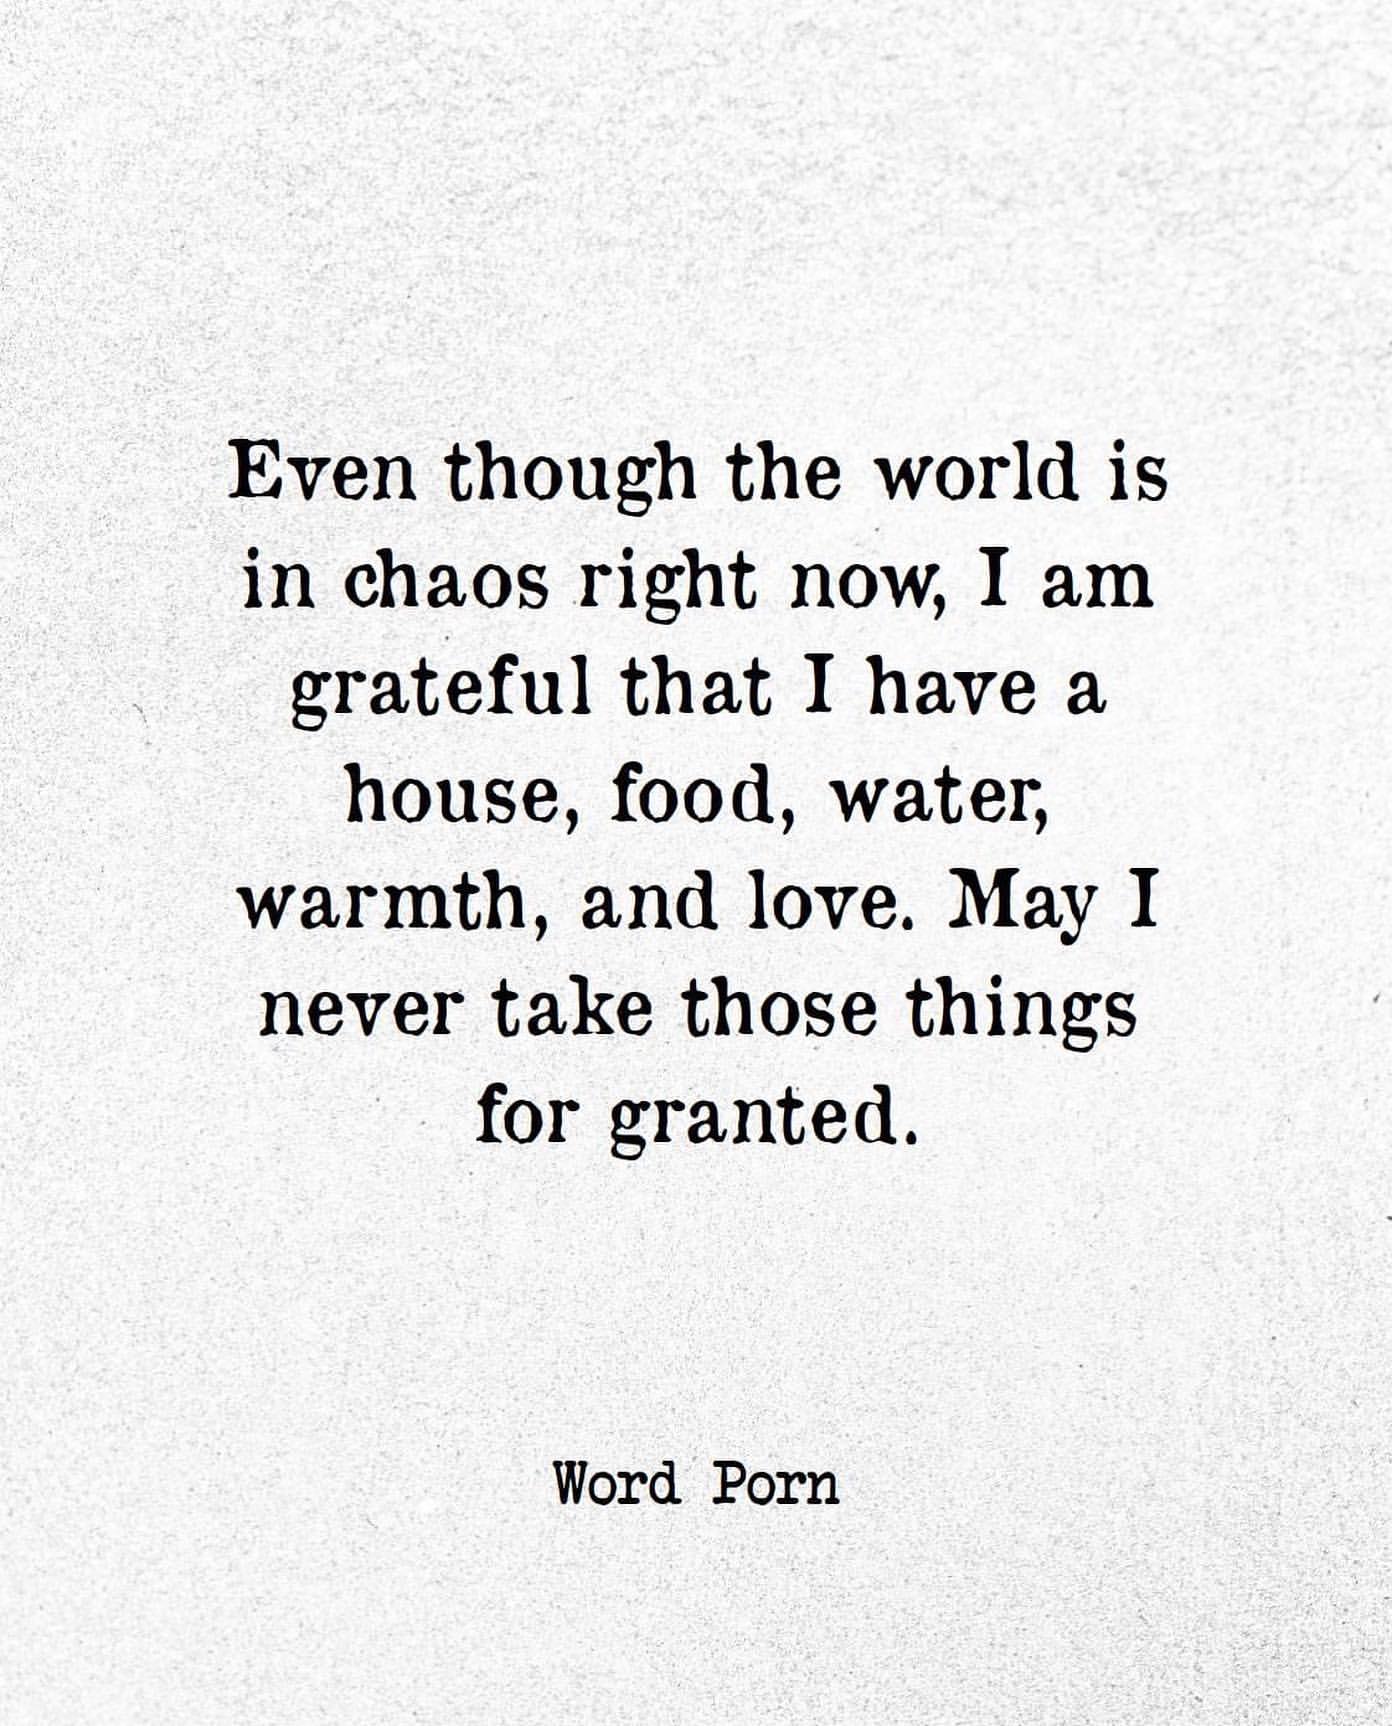 Even though the world is in chaos right now, I am grateful that I have a house, food, water, warmth, and love, May I never take those things for granted.